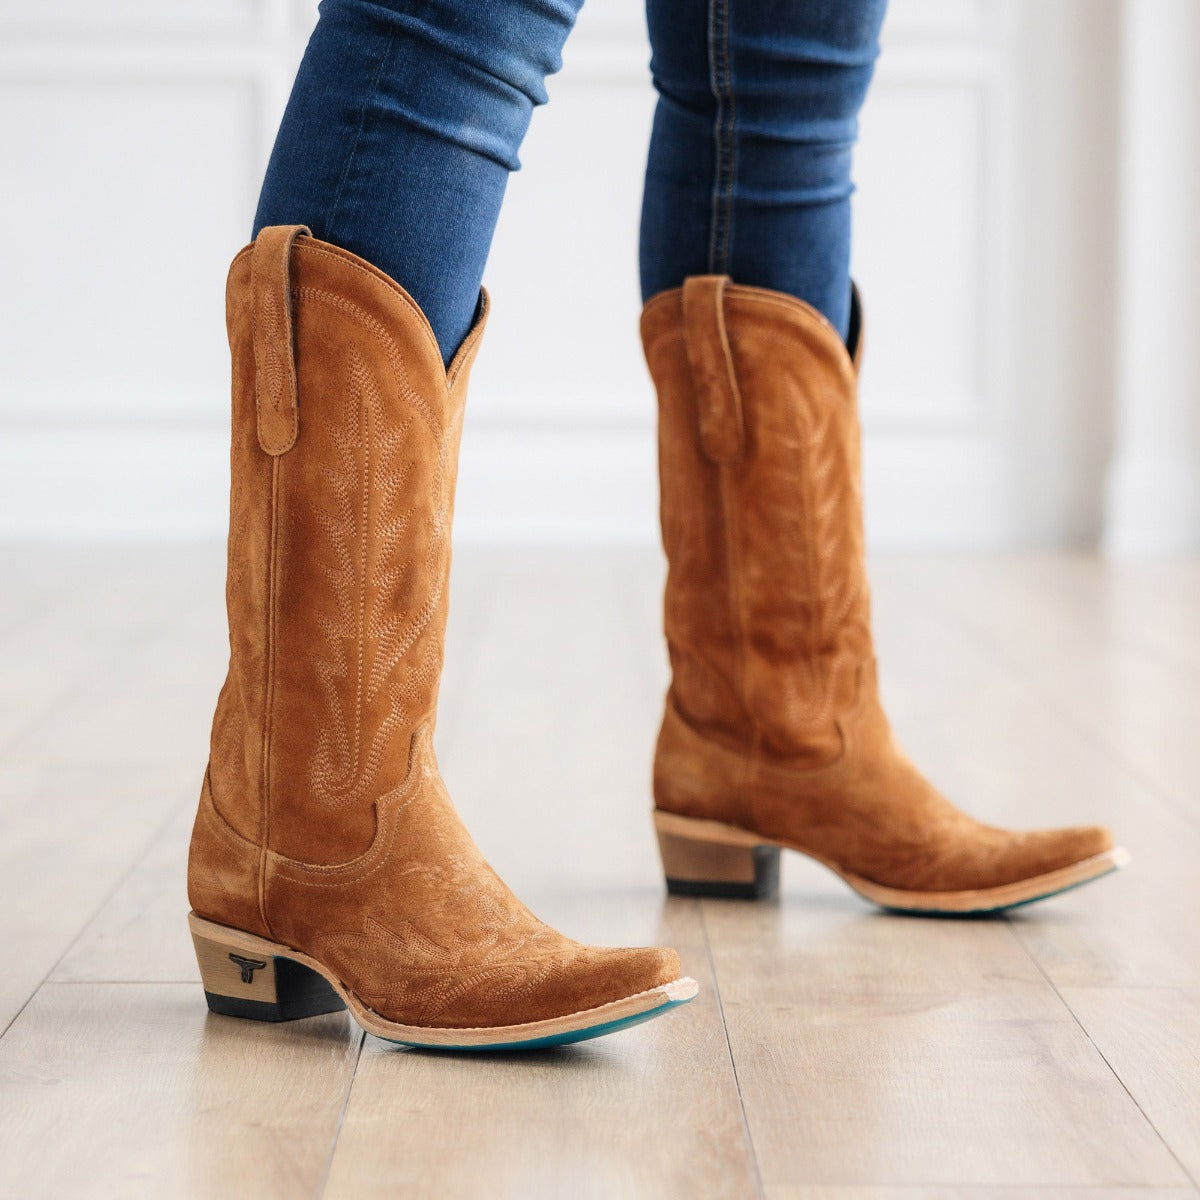 Lane LEXINGTON BOOTS in TOFFEE SUEDE